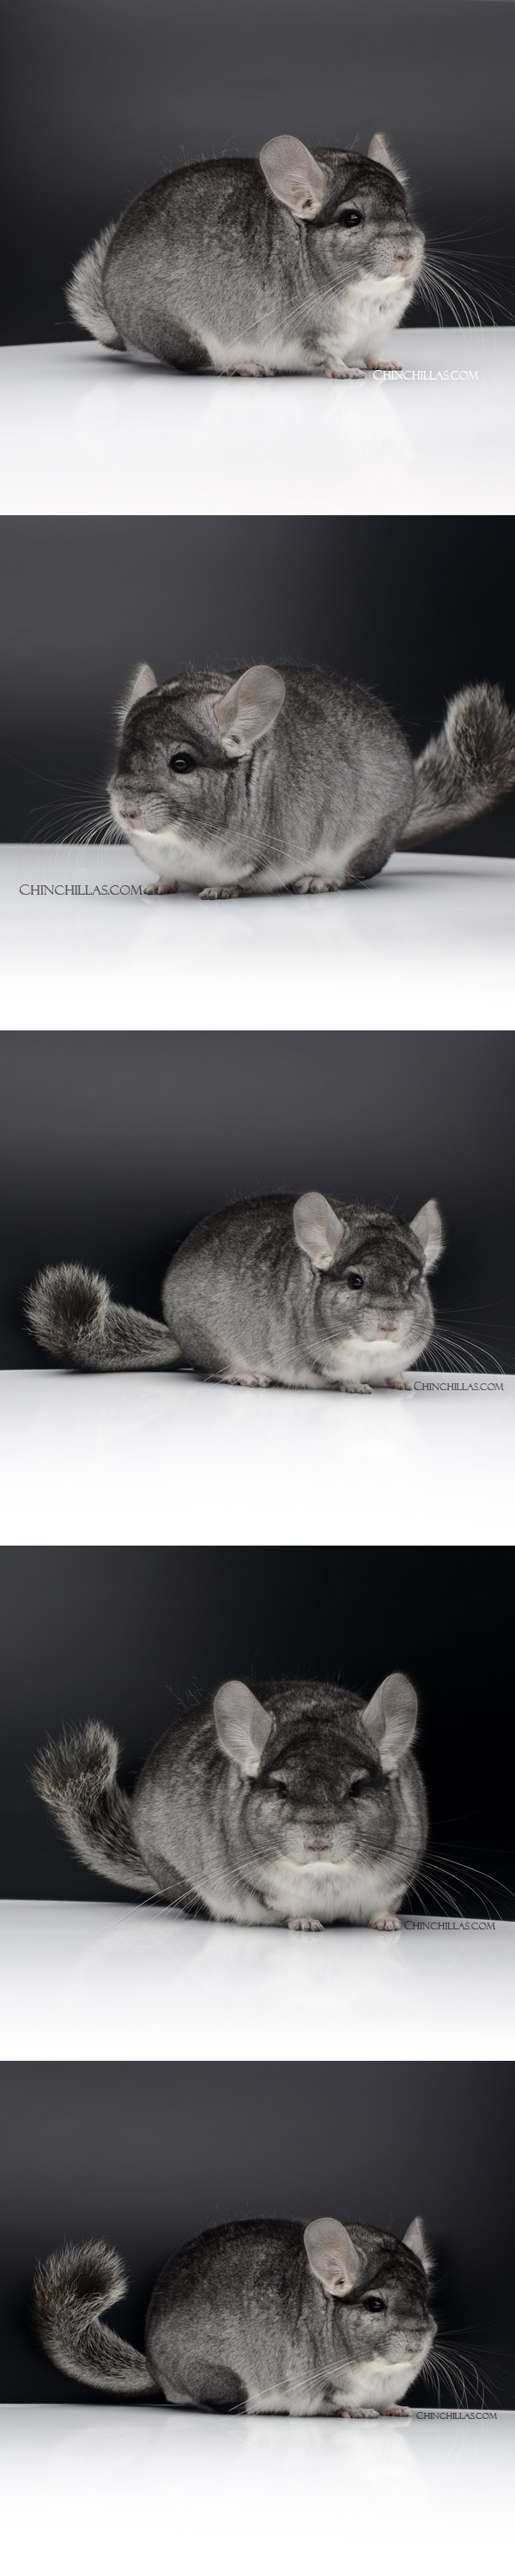 Chinchilla or related item offered for sale or export on Chinchillas.com - 000009 Exceptional Large Standard ( Royal Persian Angora Carrier ) Male Chinchilla